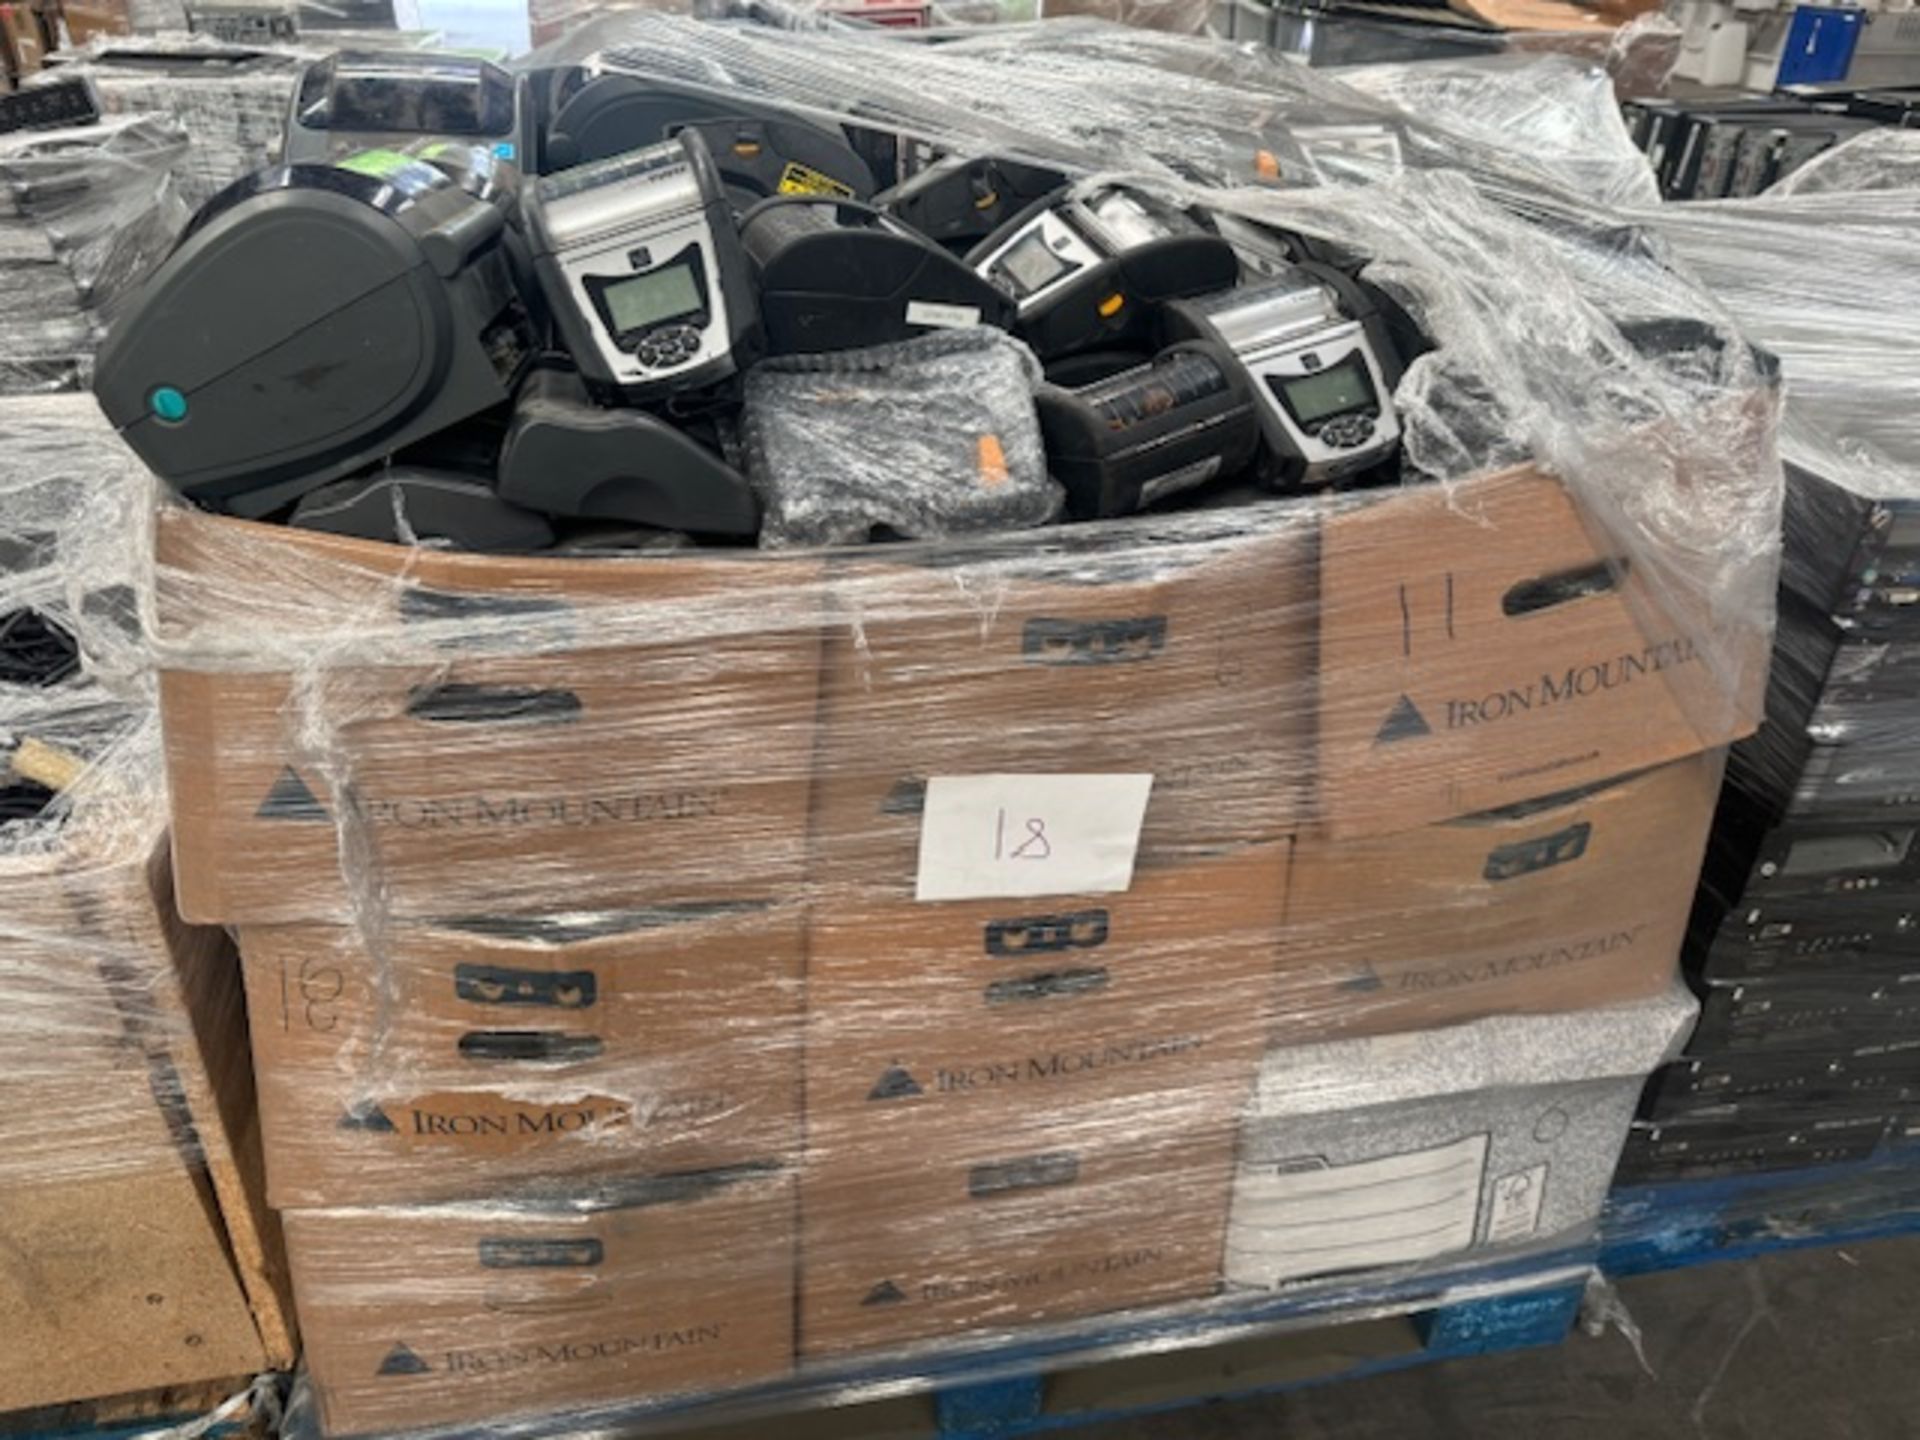 IT PALLET LOT INCLUDING A VERY LARGE QUANTITY OF ZEBRA LABEL PRINTERS IN VARIOUS MODELS AND SIZES